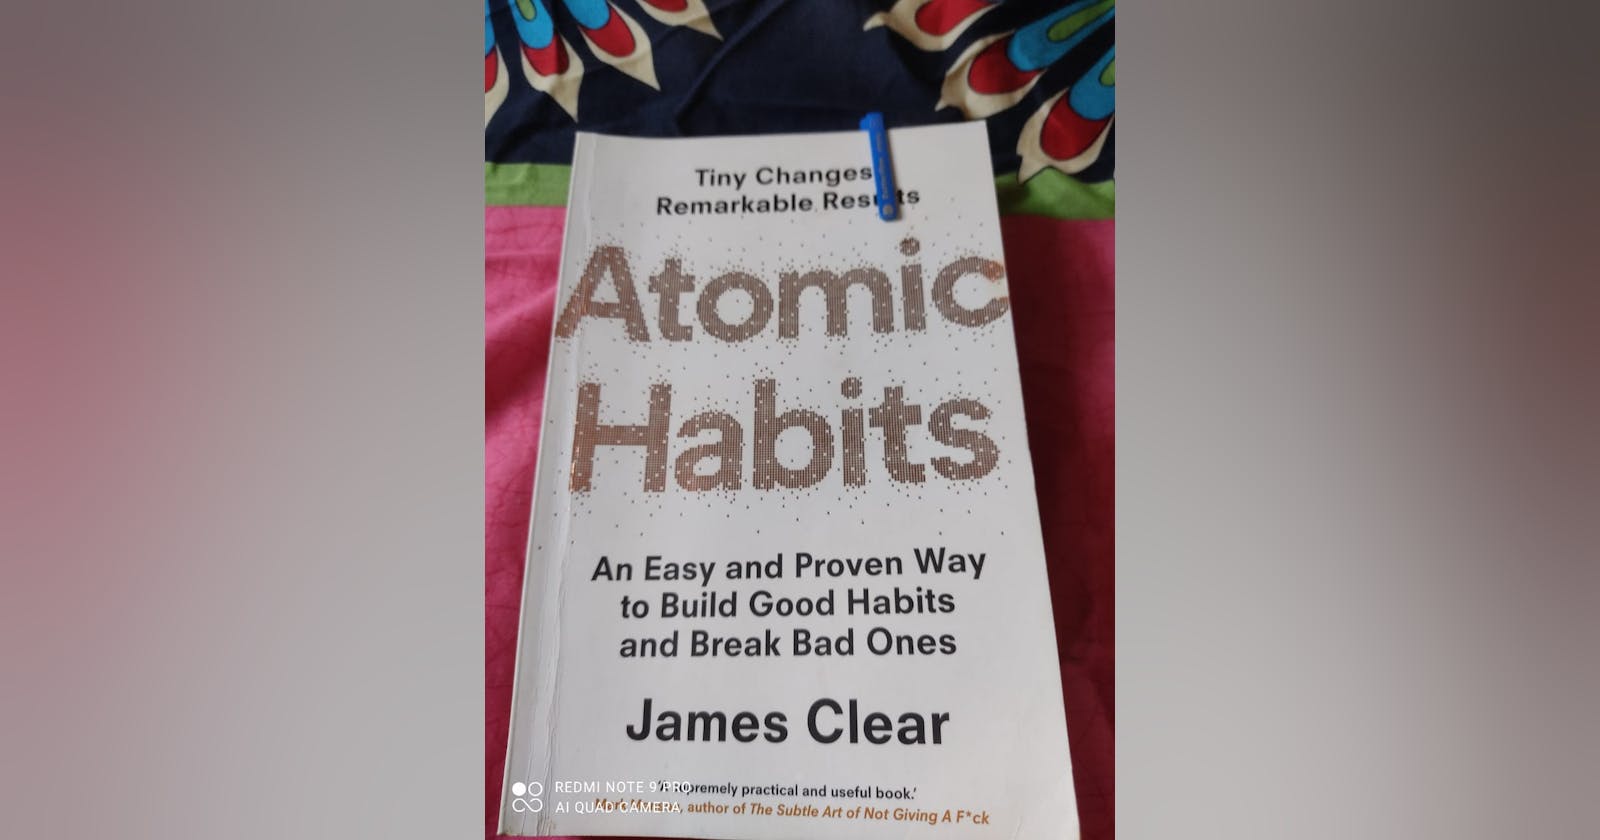 March, Good Read - Atomic Habits by James Clear (Book Gist)